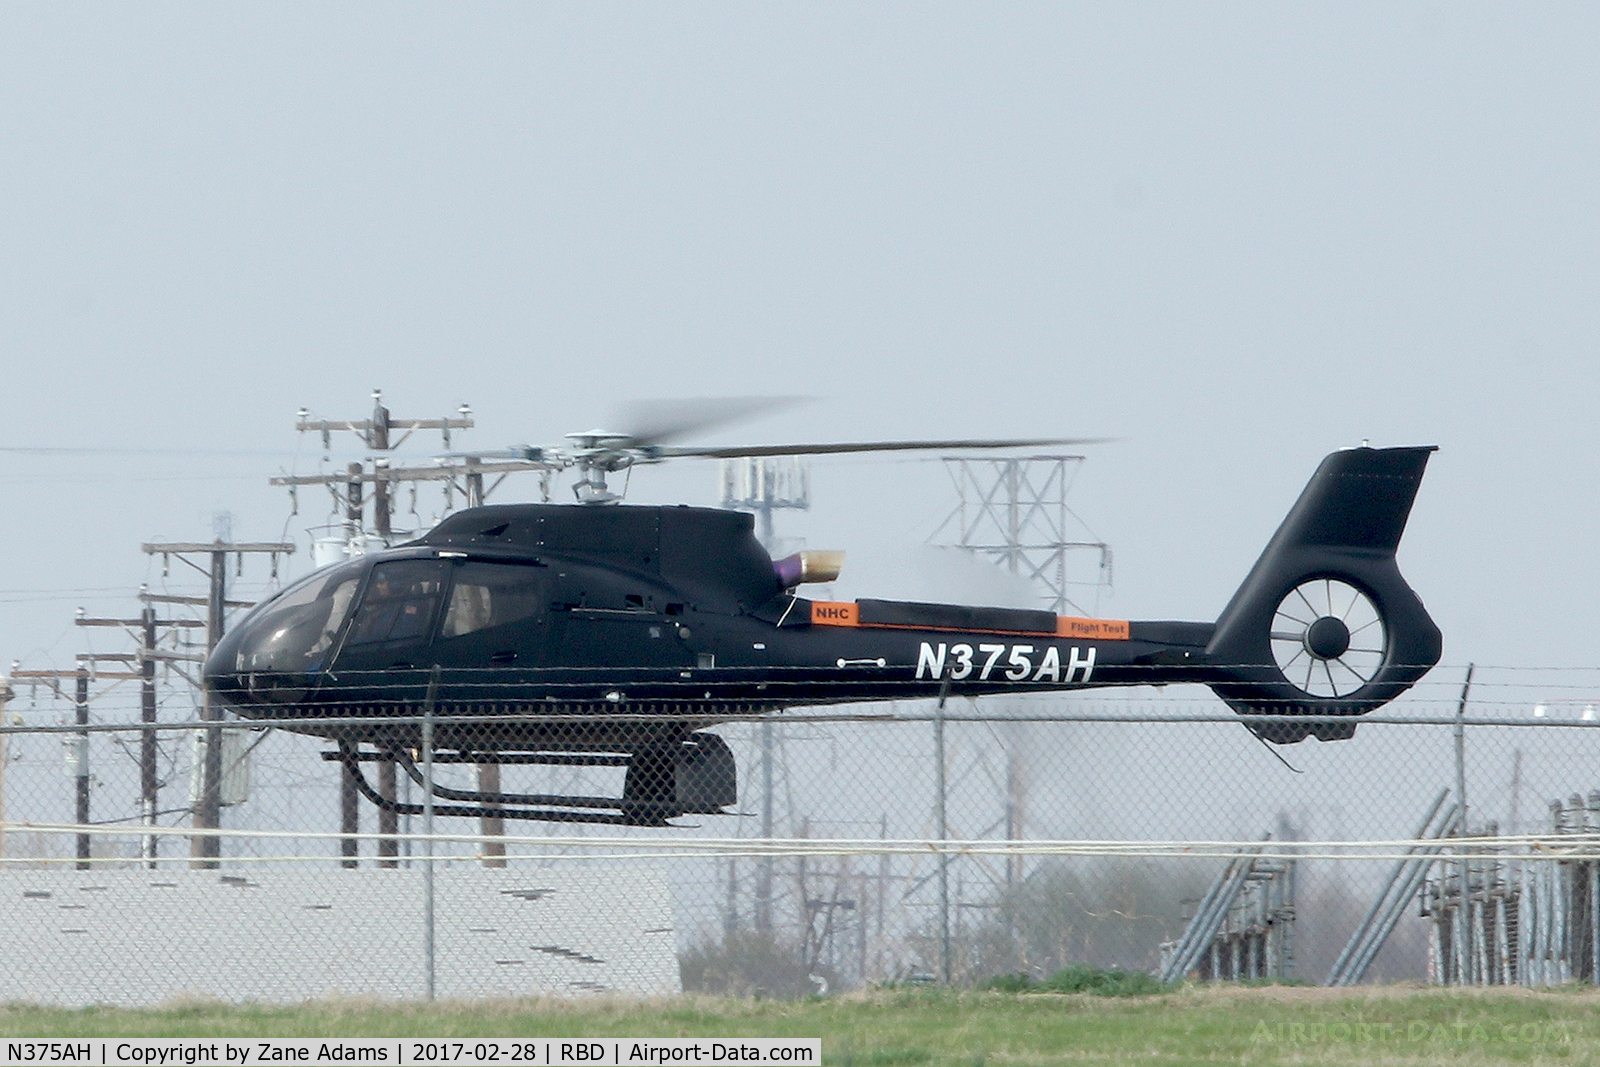 N375AH, 2016 Airbus Helicopters EC-130T-2 C/N 8245, In town for the 2017 Heliexpo - Dallas, TX